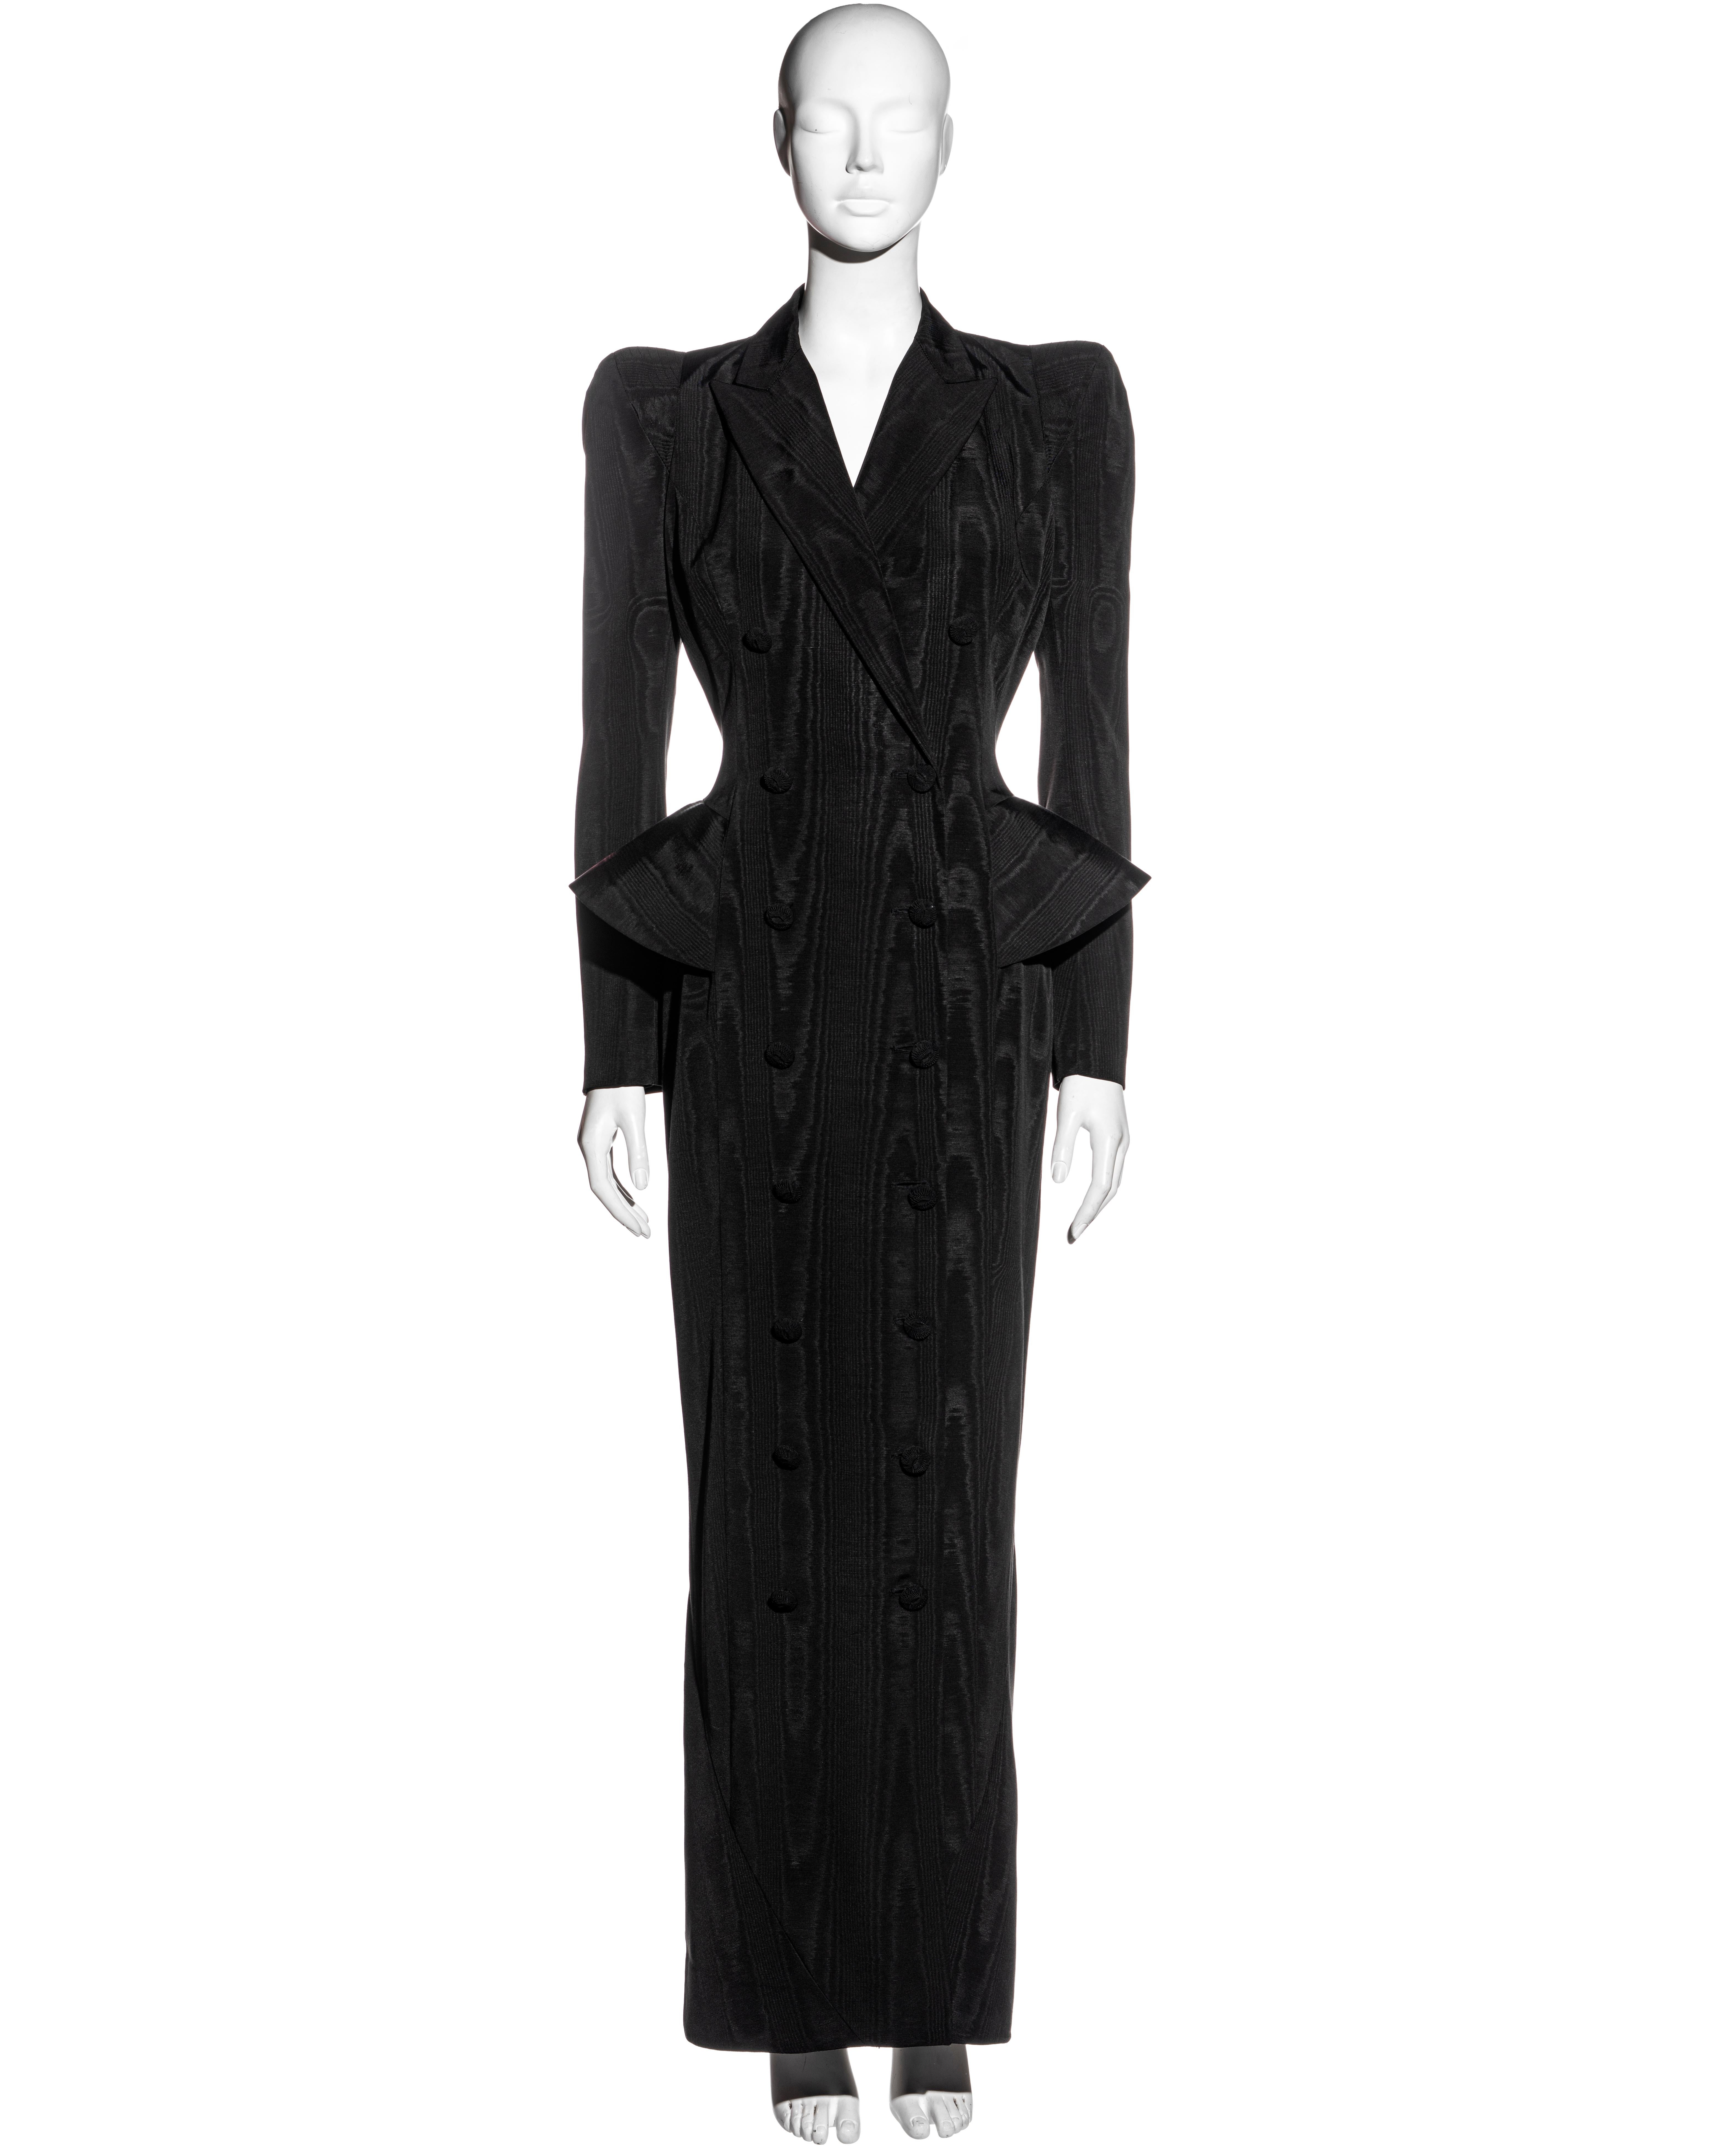 ▪ John Galliano black moiré double-breasted evening dress coat
▪ Pagoda shoulders
▪ Cord wrapped buttons
▪ Skirt back with cross-over scissor panels finishing as a peplum at the hips
▪ Peak lapels 
▪ Haute Couture quality
▪ Fully lined 
▪ 51%